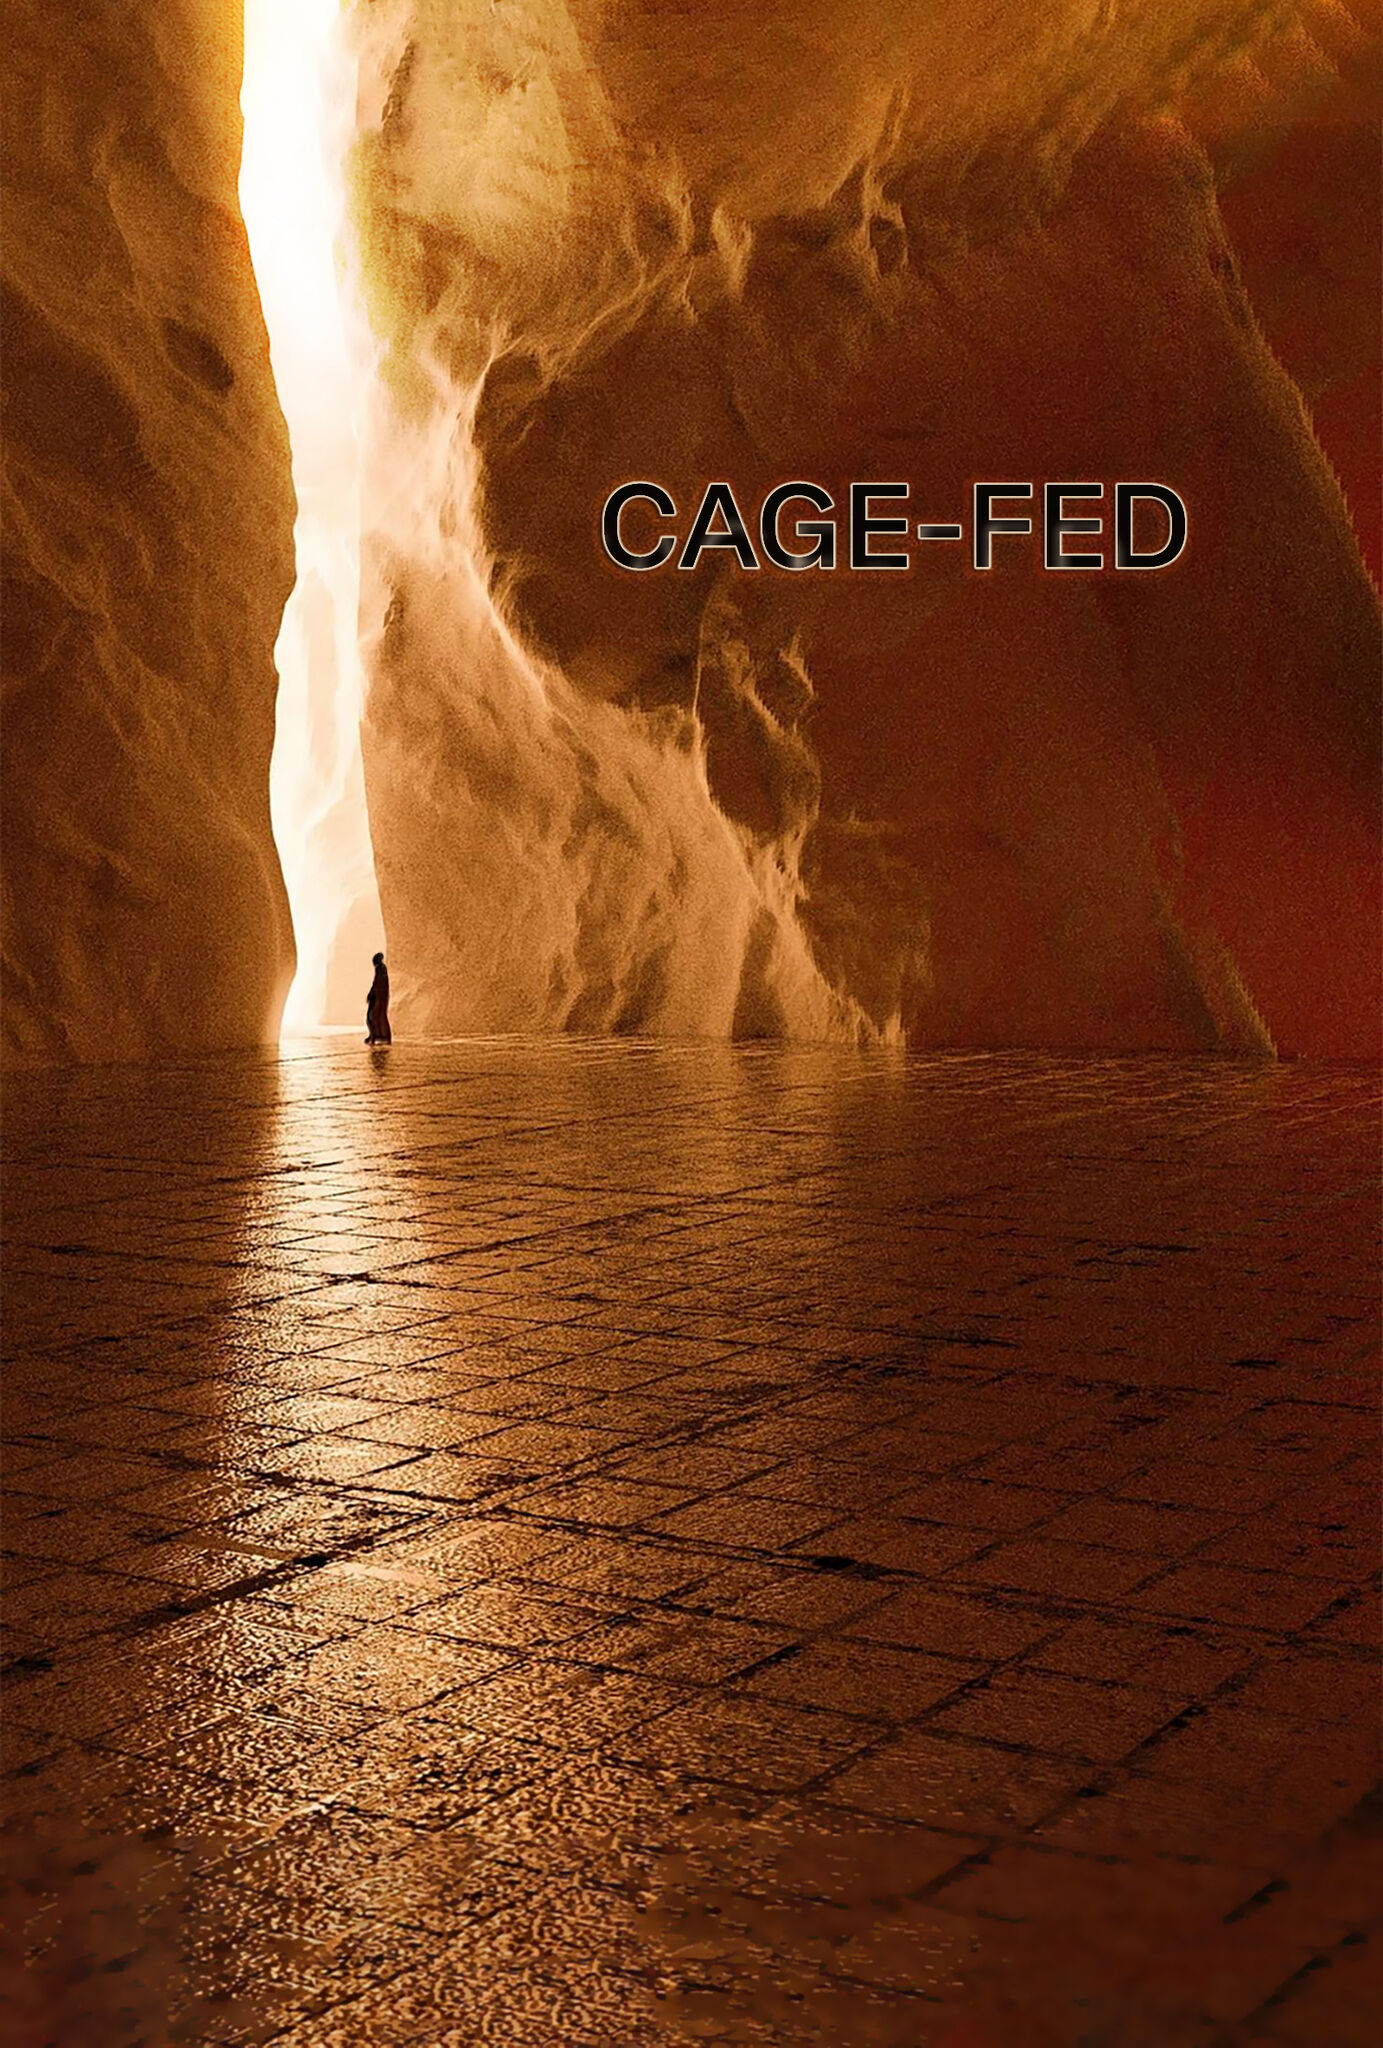 CAGE-FED